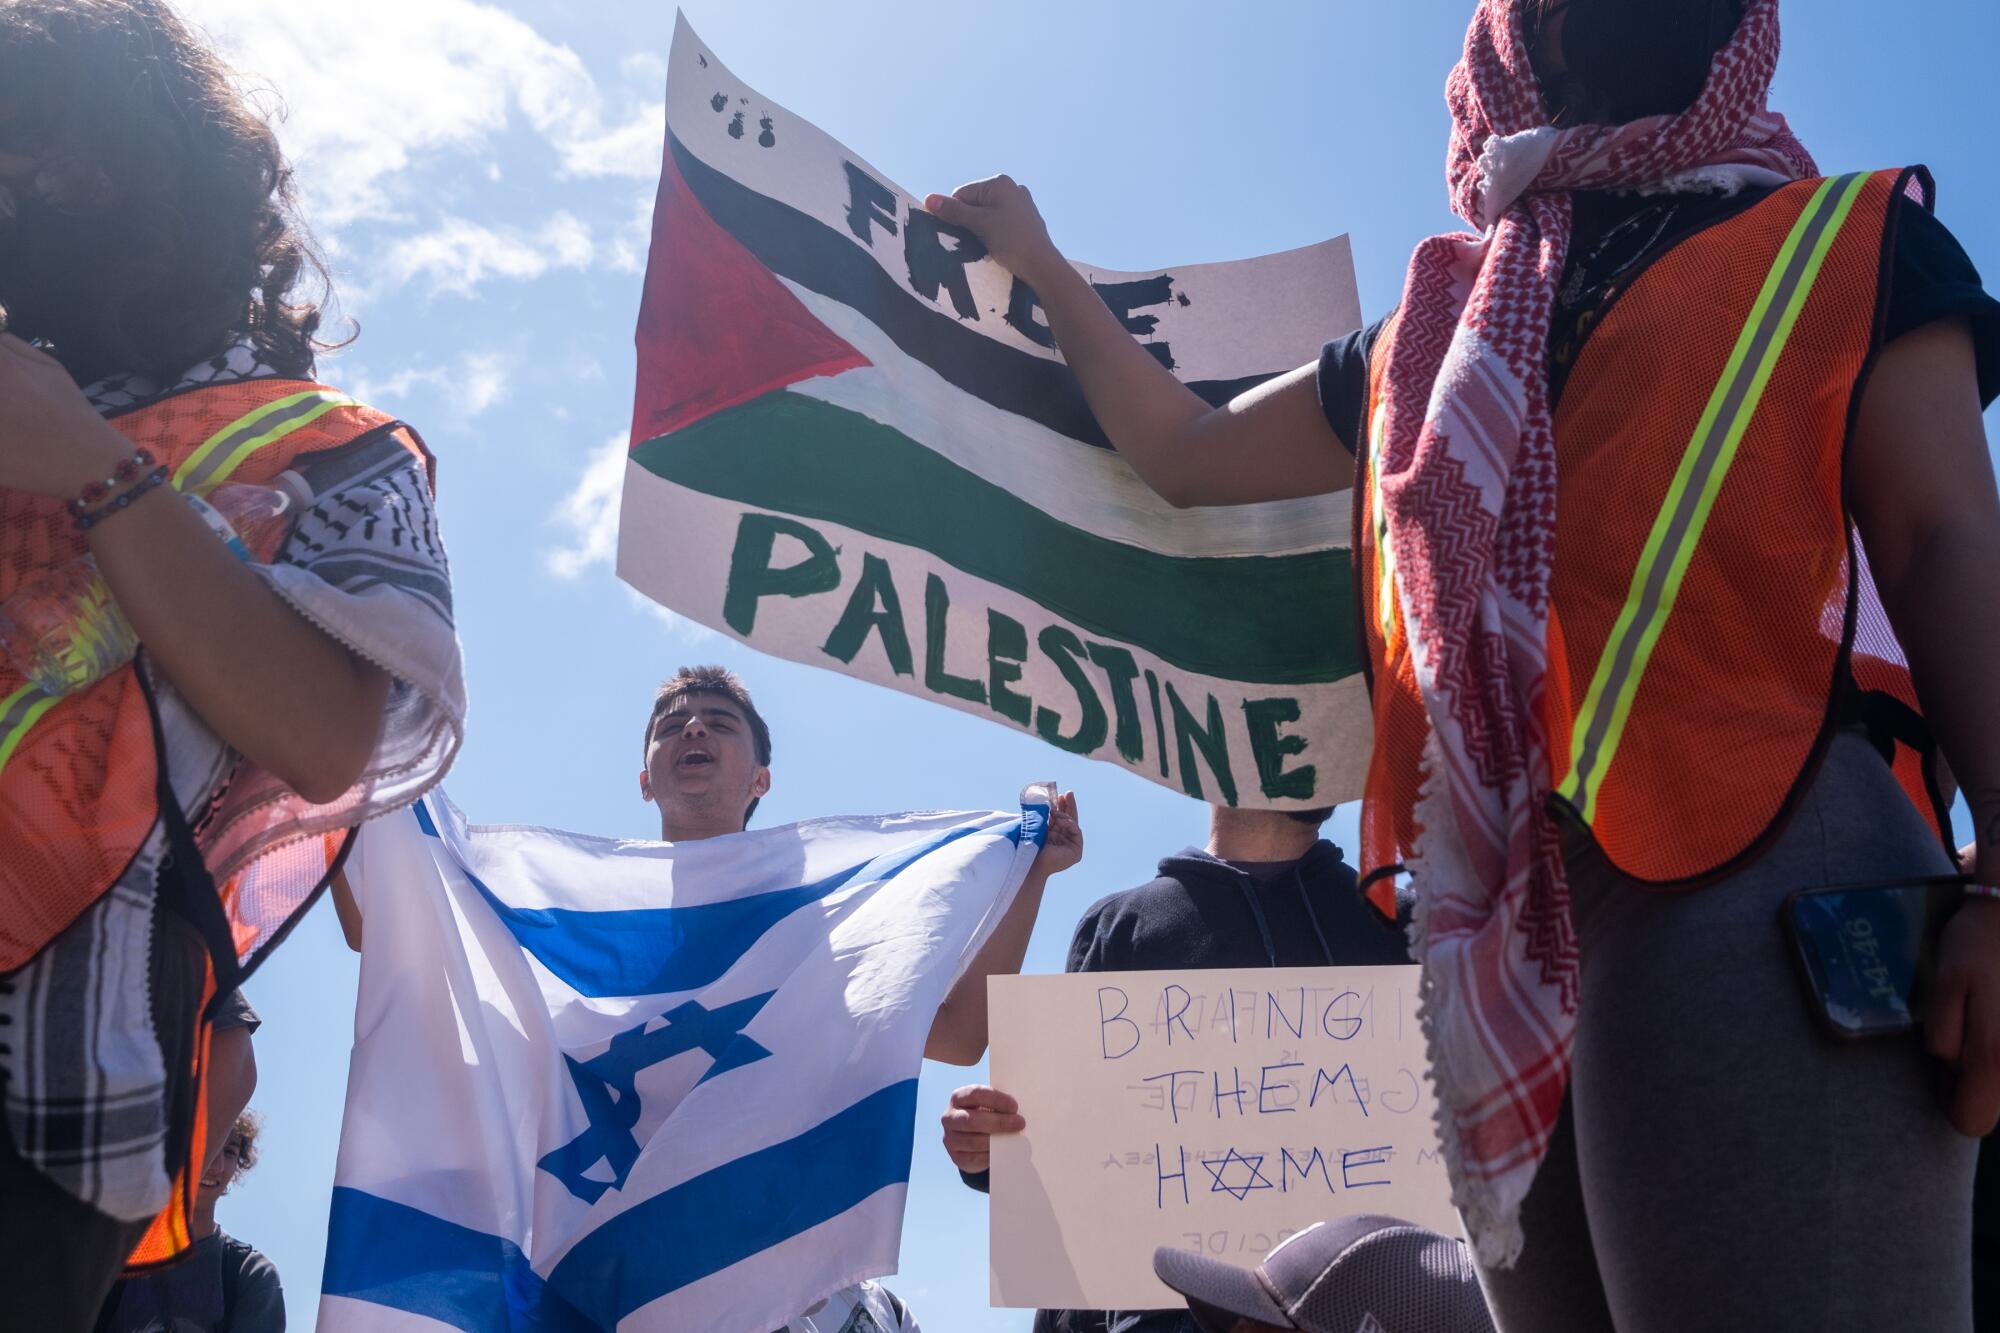 Pro-Israeli demonstrators gather near an encampment set up by pro-Palestine protesters on the campus of UCLA.